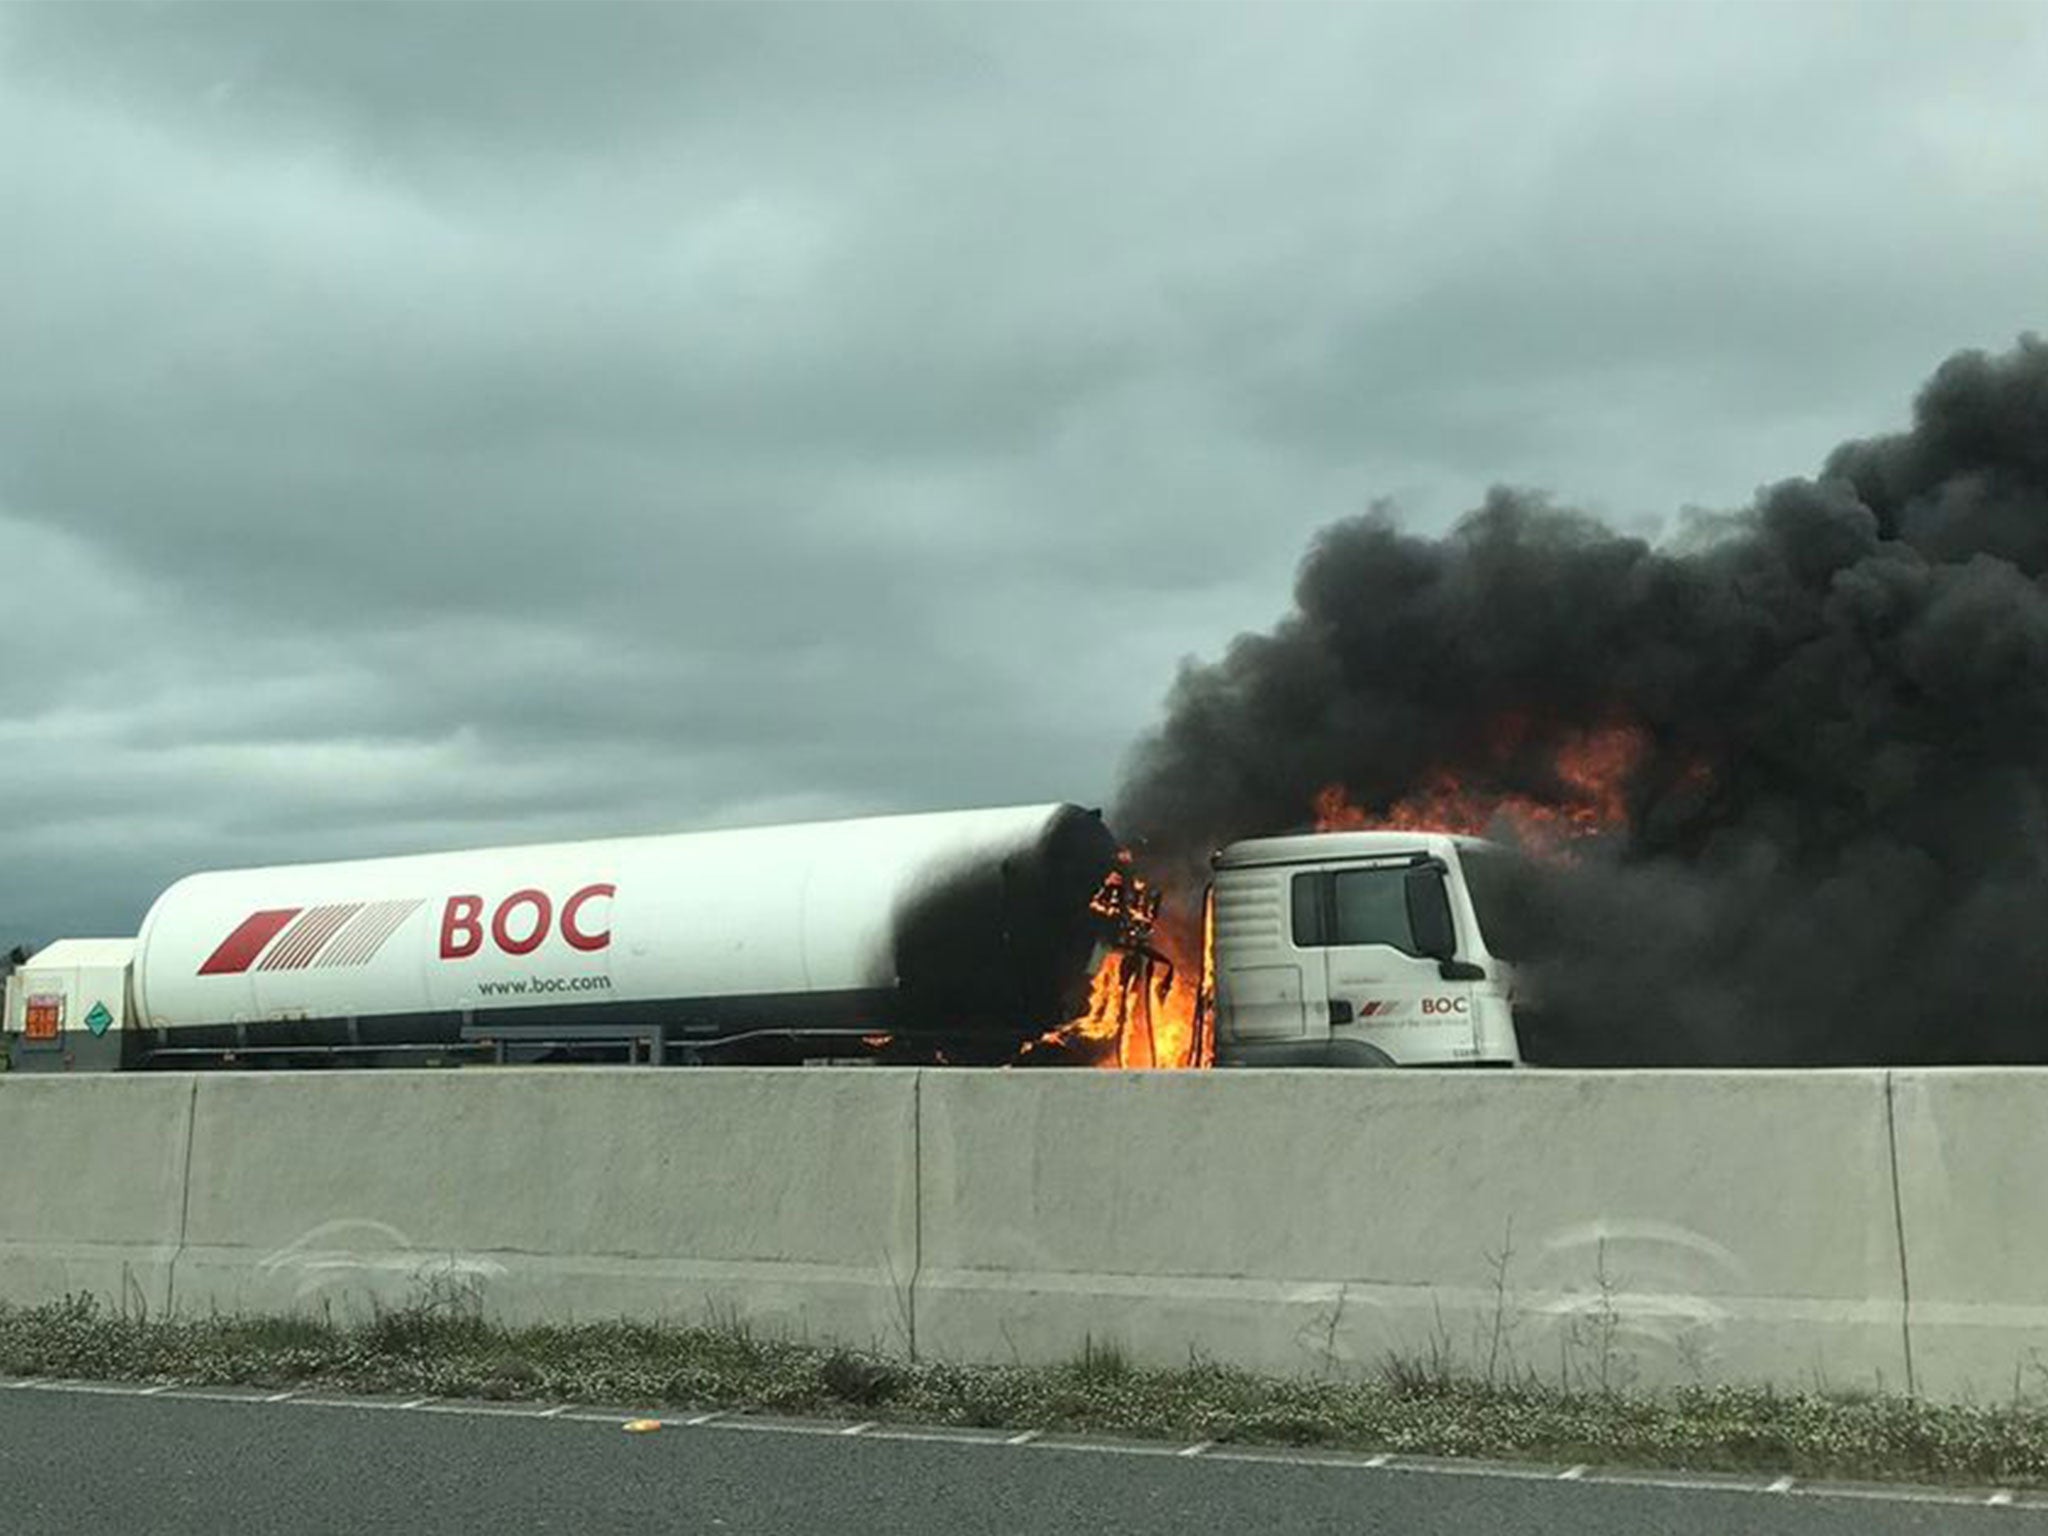 The fire is understood to involve a BOC gas tanker